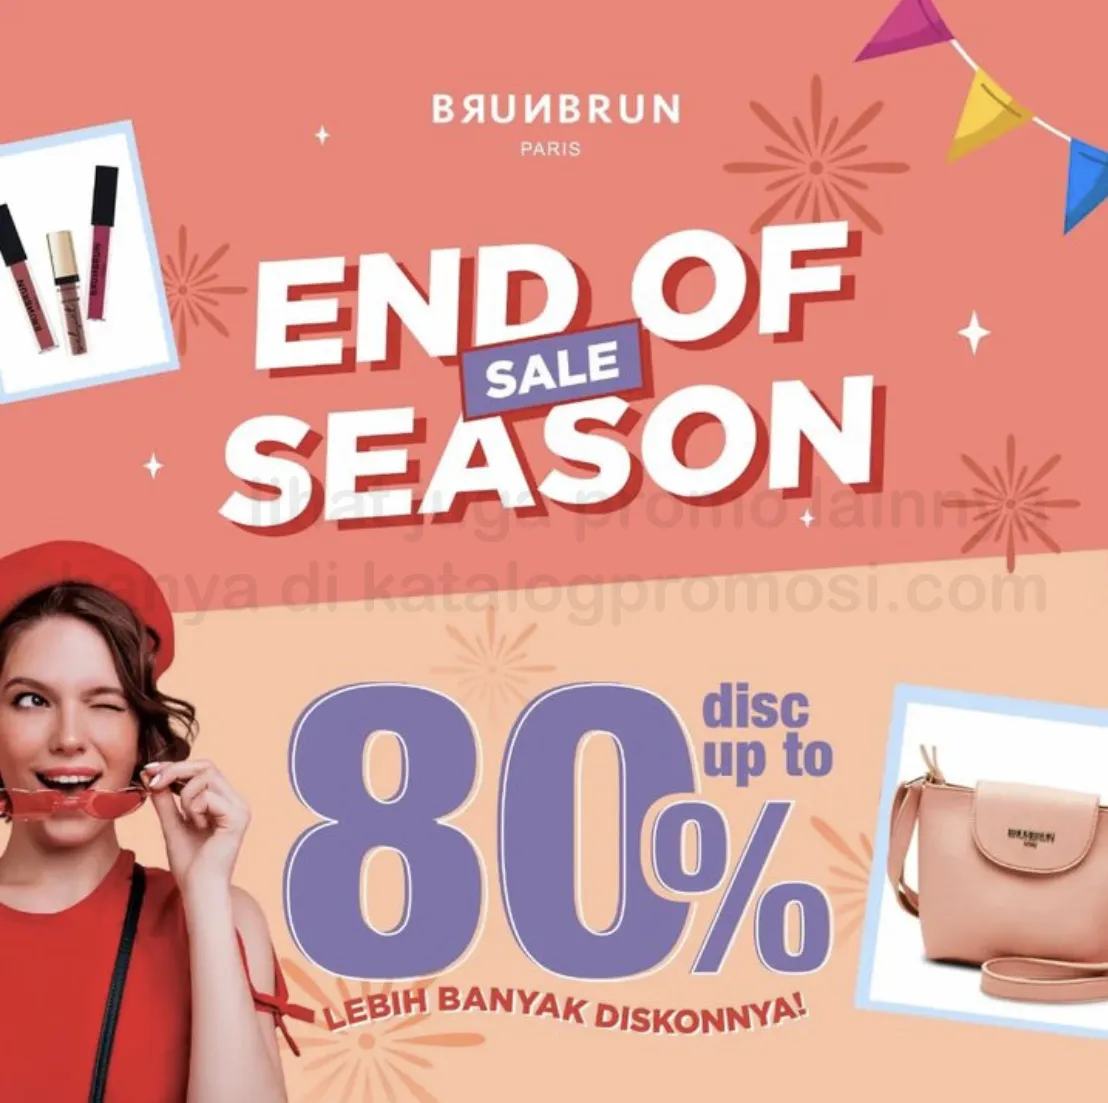 Promo BRUN BRUN END OF SEASON SALE ! Discount up to 80% off